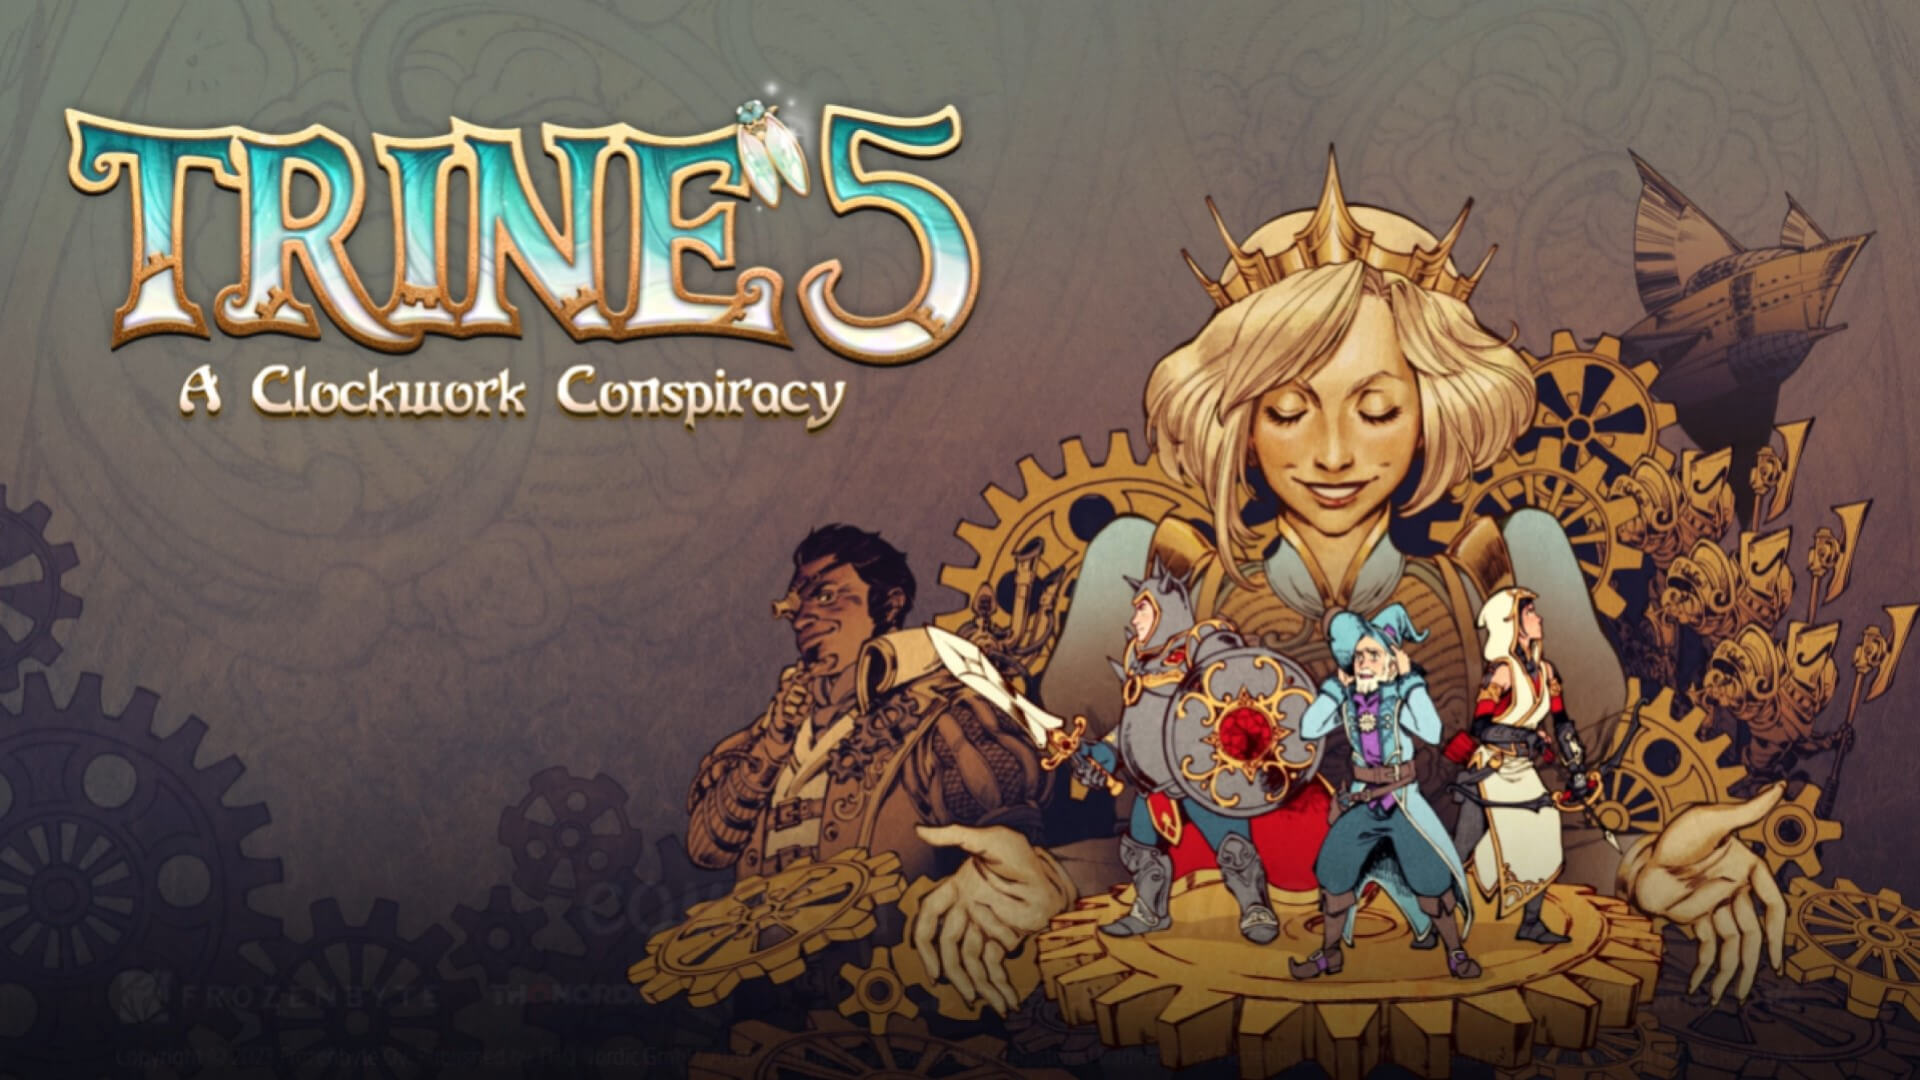 for android download Trine 5: A Clockwork Conspiracy